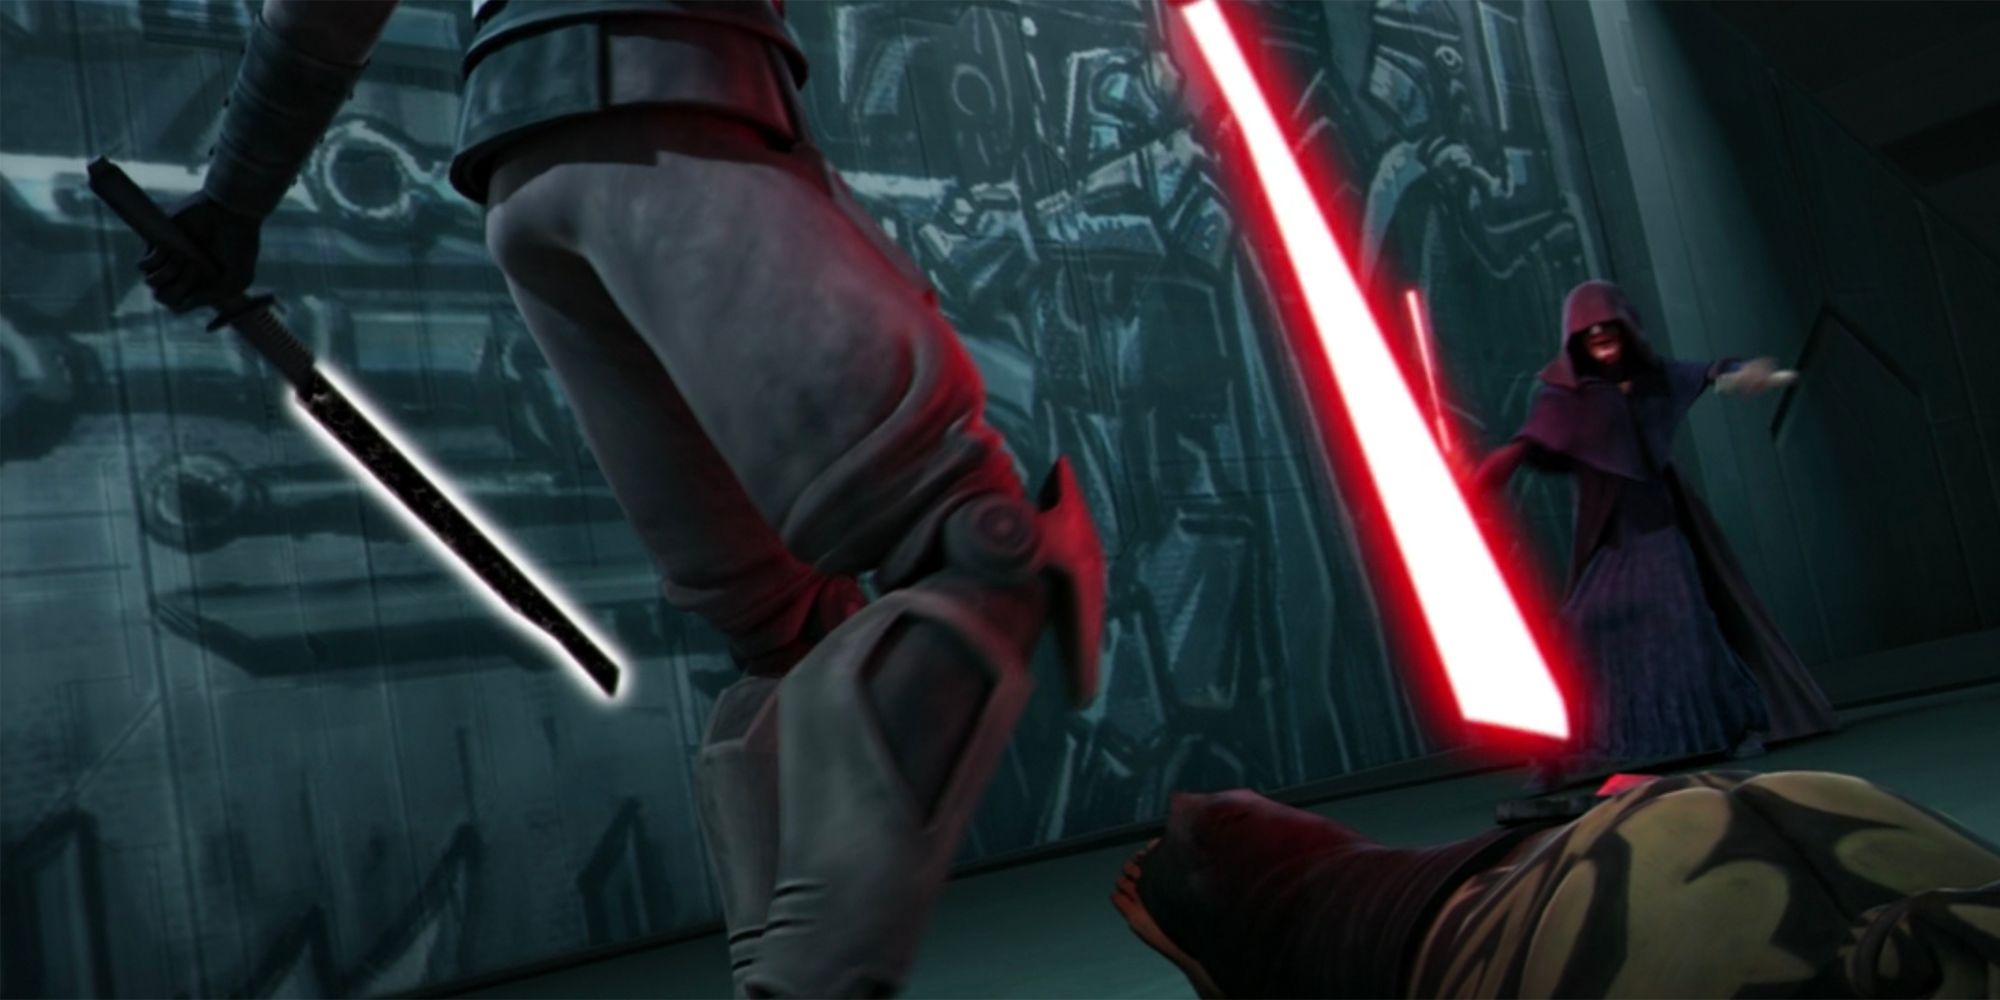 10 Greatest Duels Of The Star Wars Franchise